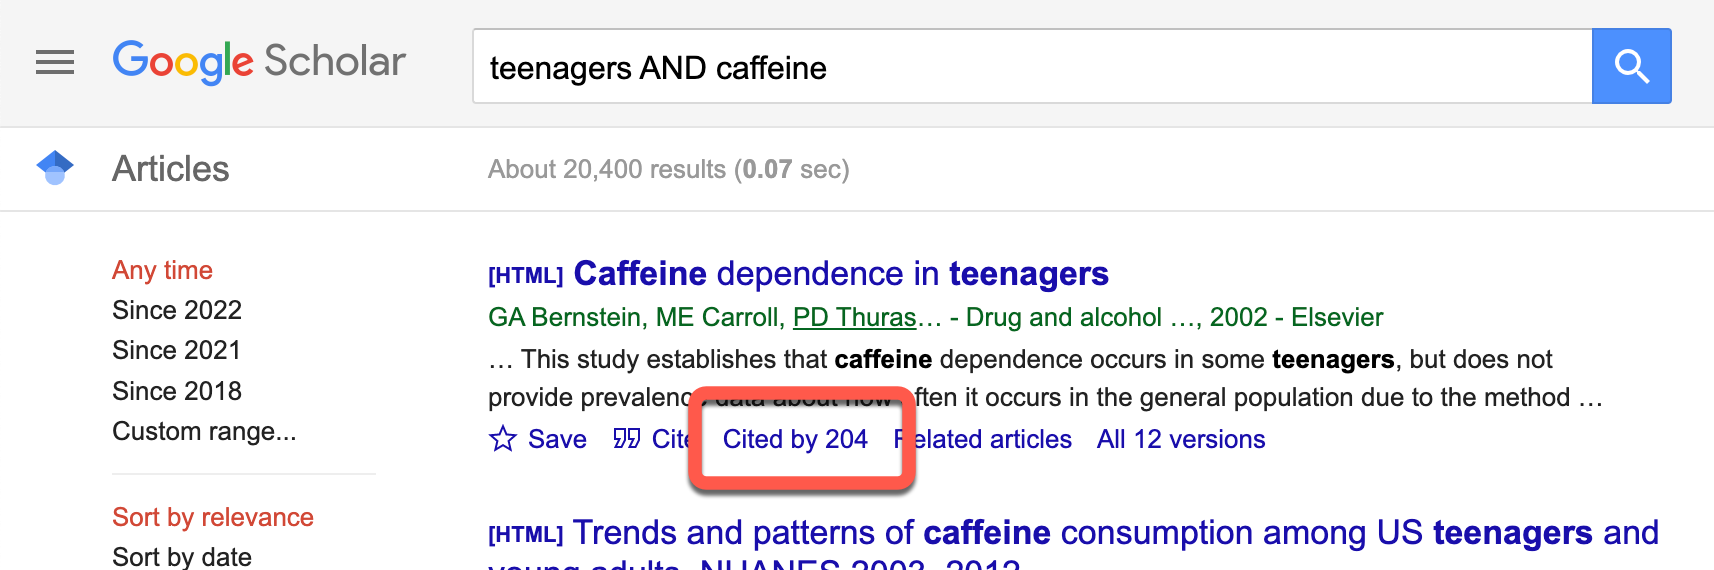 Screenshot of Google Scholar search results highlighting the "Cited By" link